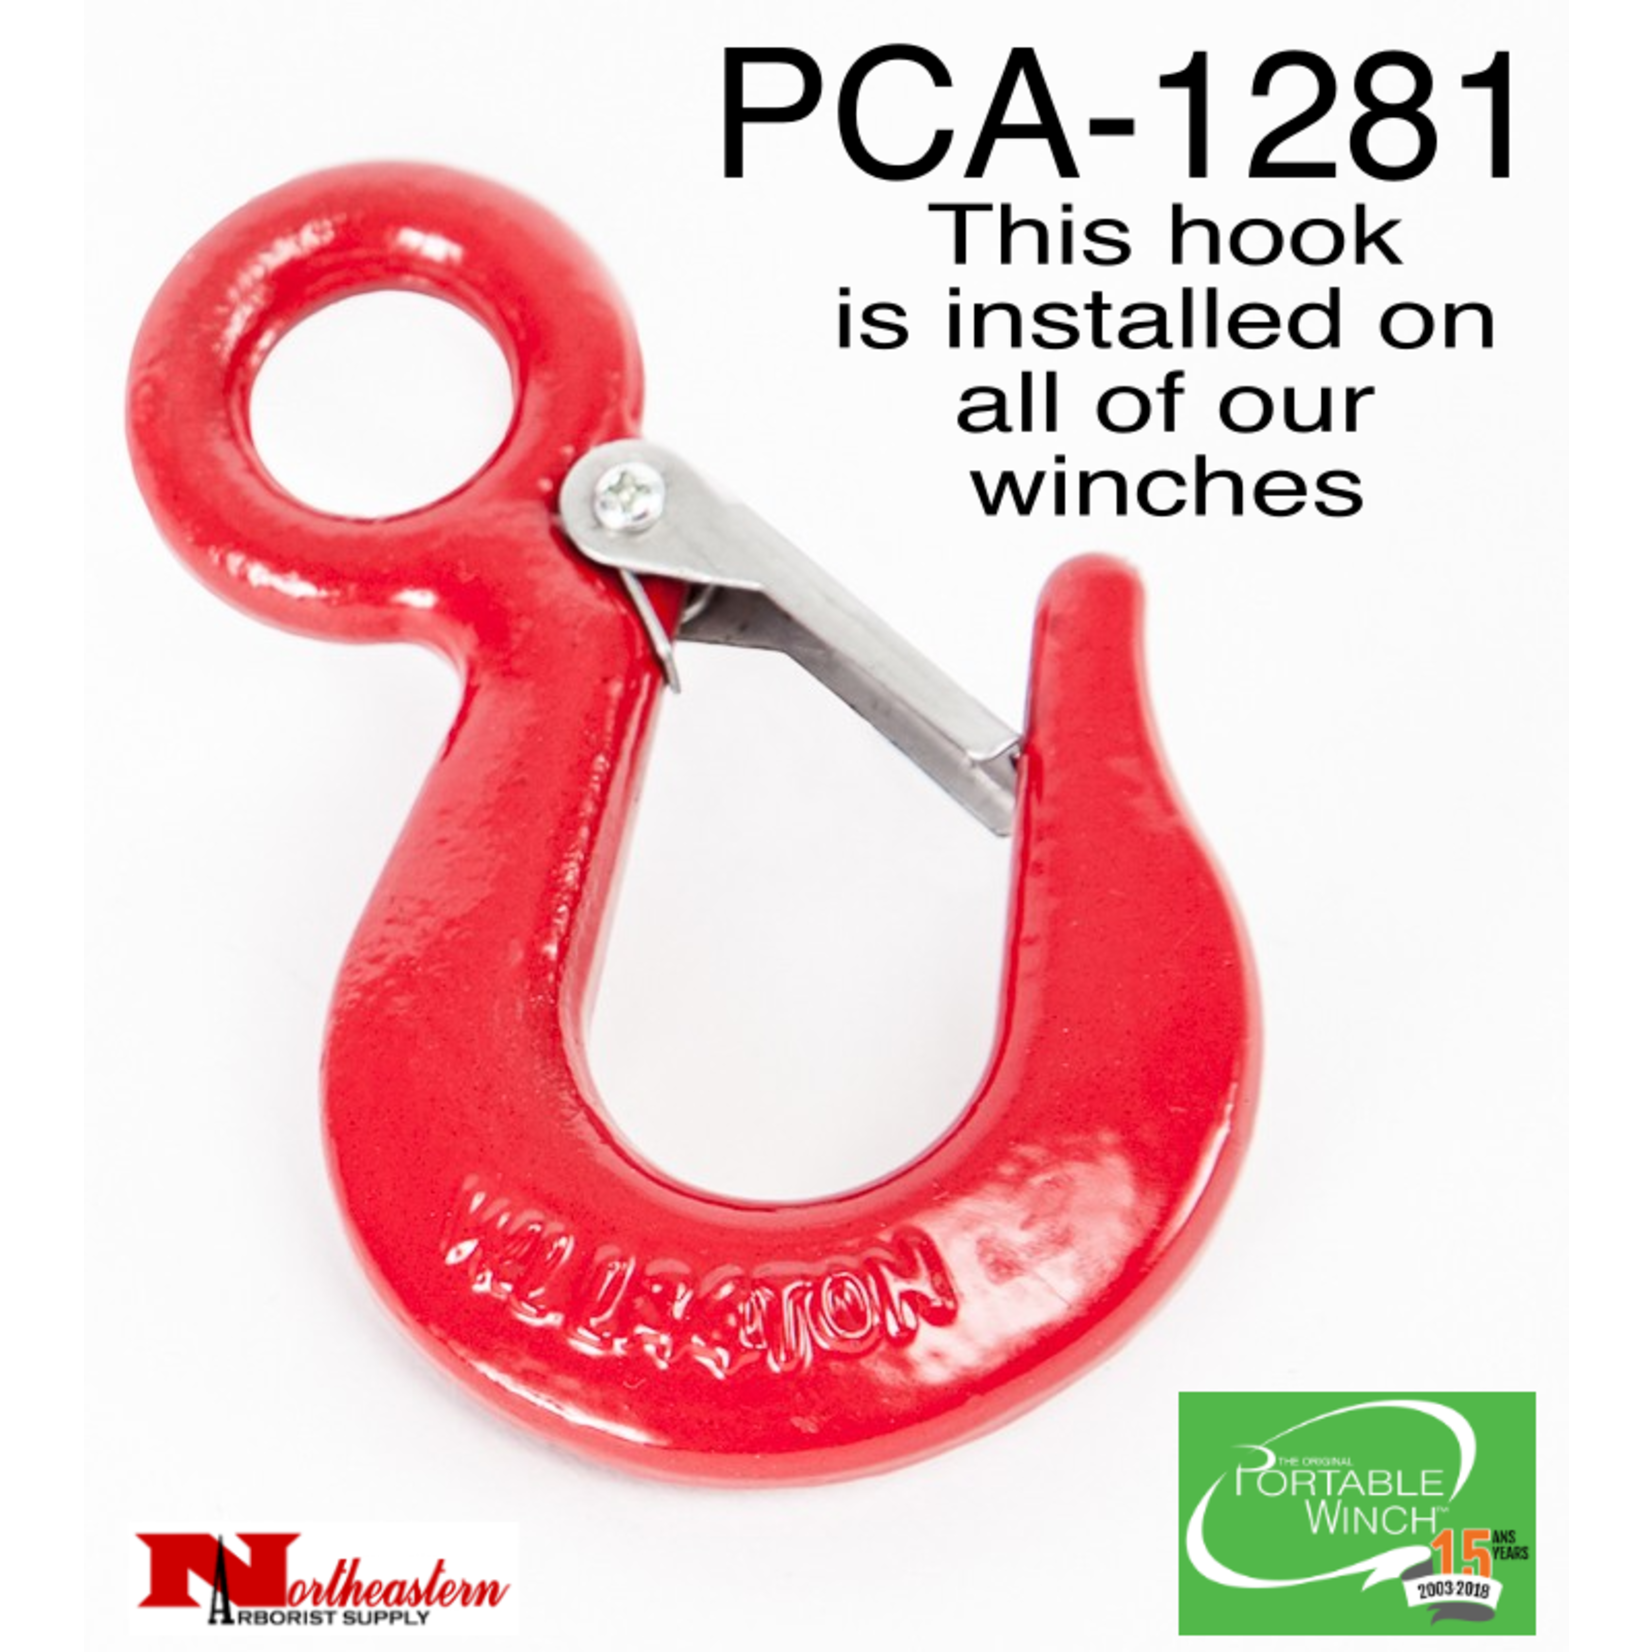 PORTABLE WINCH CO. Red Safety Hook w/Spring-Loaded Safety Gate, 3/4 Ton WLL